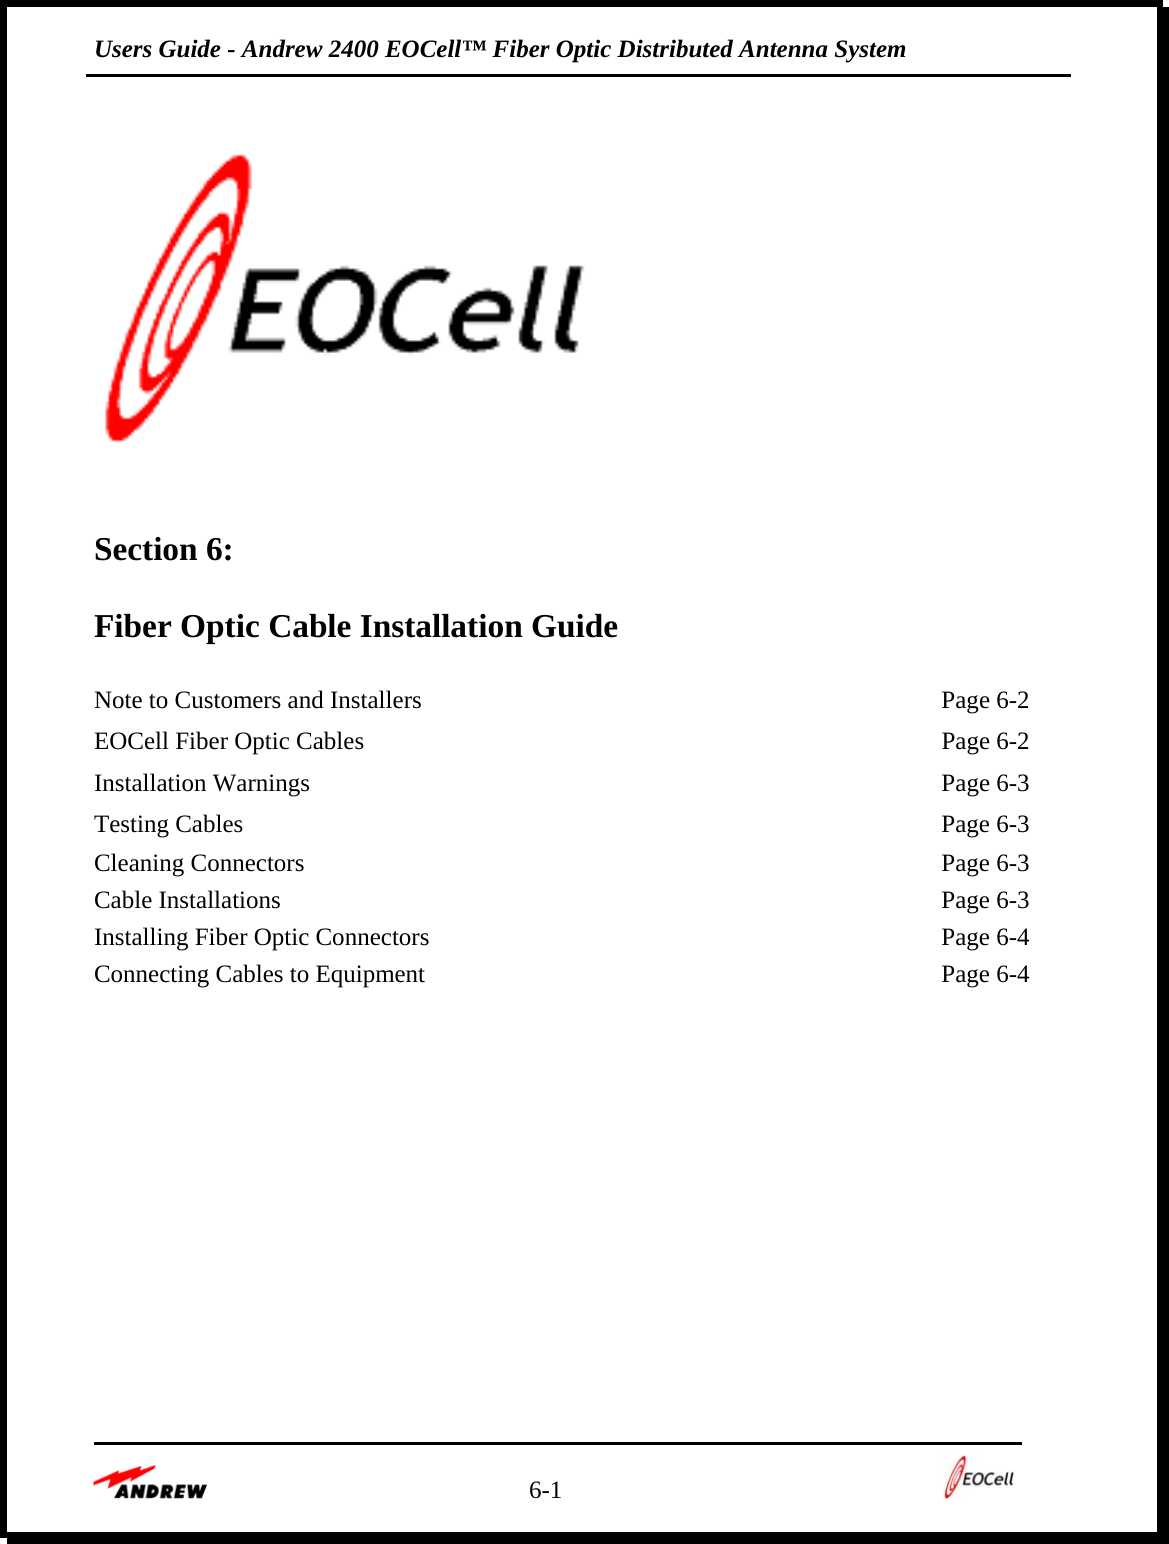 Users Guide - Andrew 2400 EOCell™ Fiber Optic Distributed Antenna System    6-1         Section 6:   Fiber Optic Cable Installation Guide  Note to Customers and Installers  Page 6-2EOCell Fiber Optic Cables  Page 6-2Installation Warnings  Page 6-3Testing Cables  Page 6-3Cleaning Connectors  Page 6-3Cable Installations  Page 6-3Installing Fiber Optic Connectors  Page 6-4Connecting Cables to Equipment  Page 6-4 